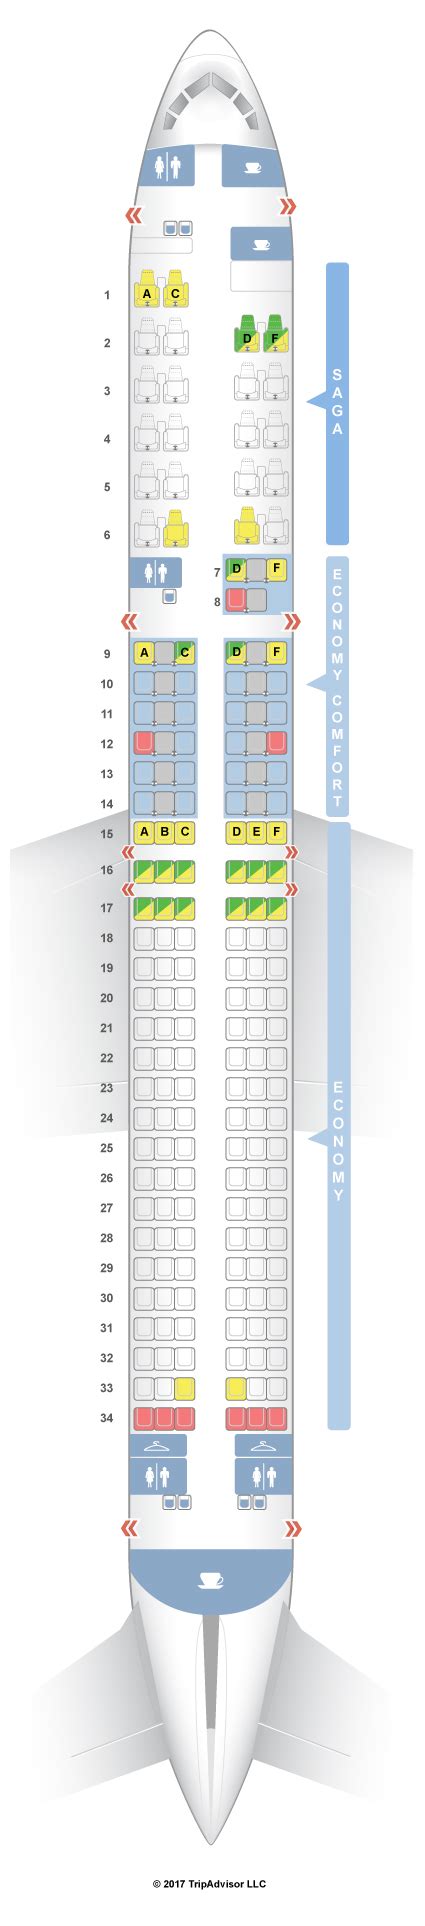 Icelandair boeing 757 200 seat plan. The Lufthansa Boeing 787-9 seat map shows 294 seats configured as: 26 Business, 21 Premium Economy, 247 Economy. Traveling in Lufthansa's business class on their Boeing 787-9 V.1 is an experience in luxury. With 26 seats, passengers are treated to spacious seating, gourmet meals, and premium in-flight entertainment. 